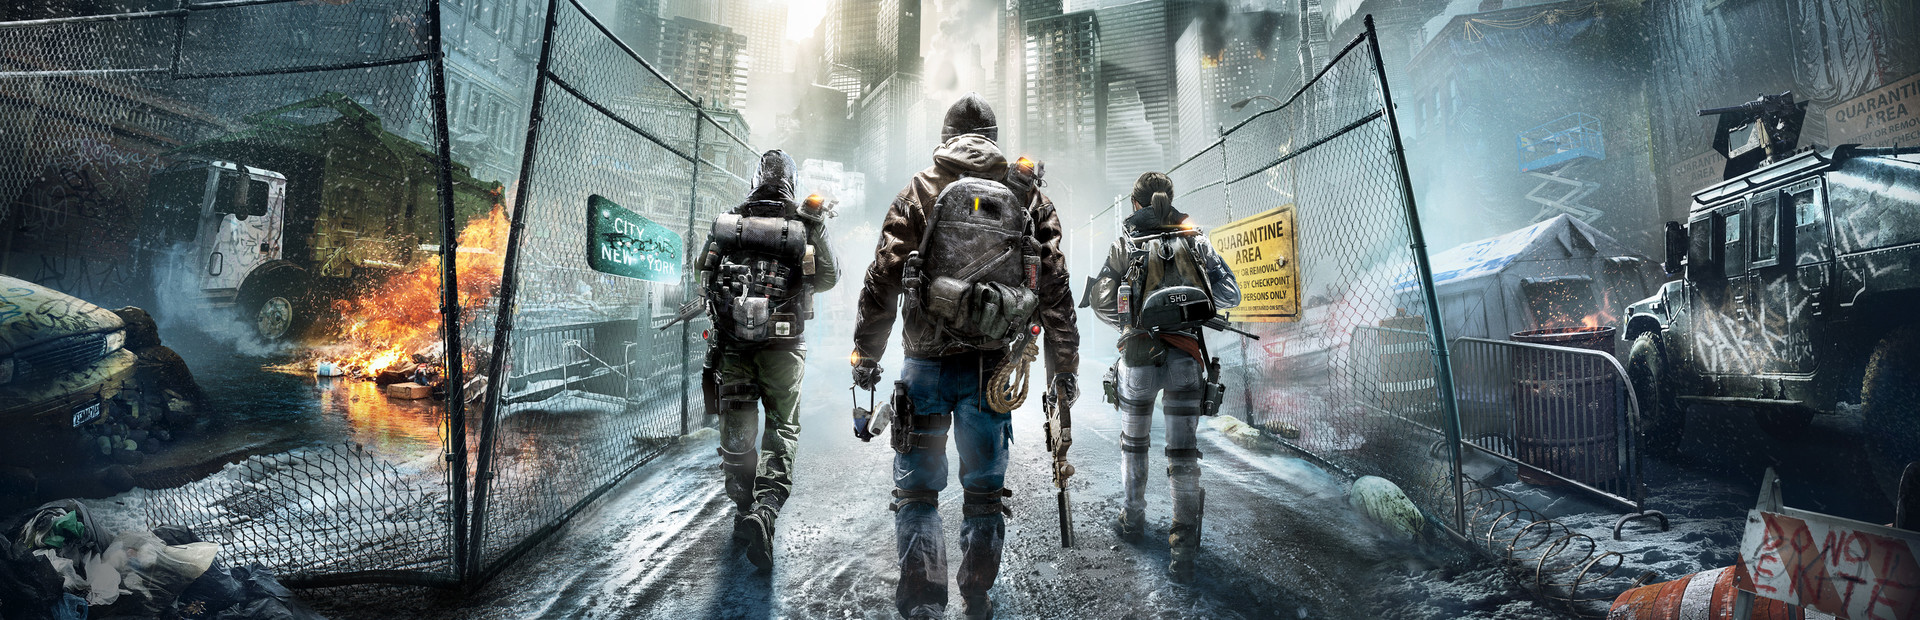 Tom Clancy’s The Division™ cover image